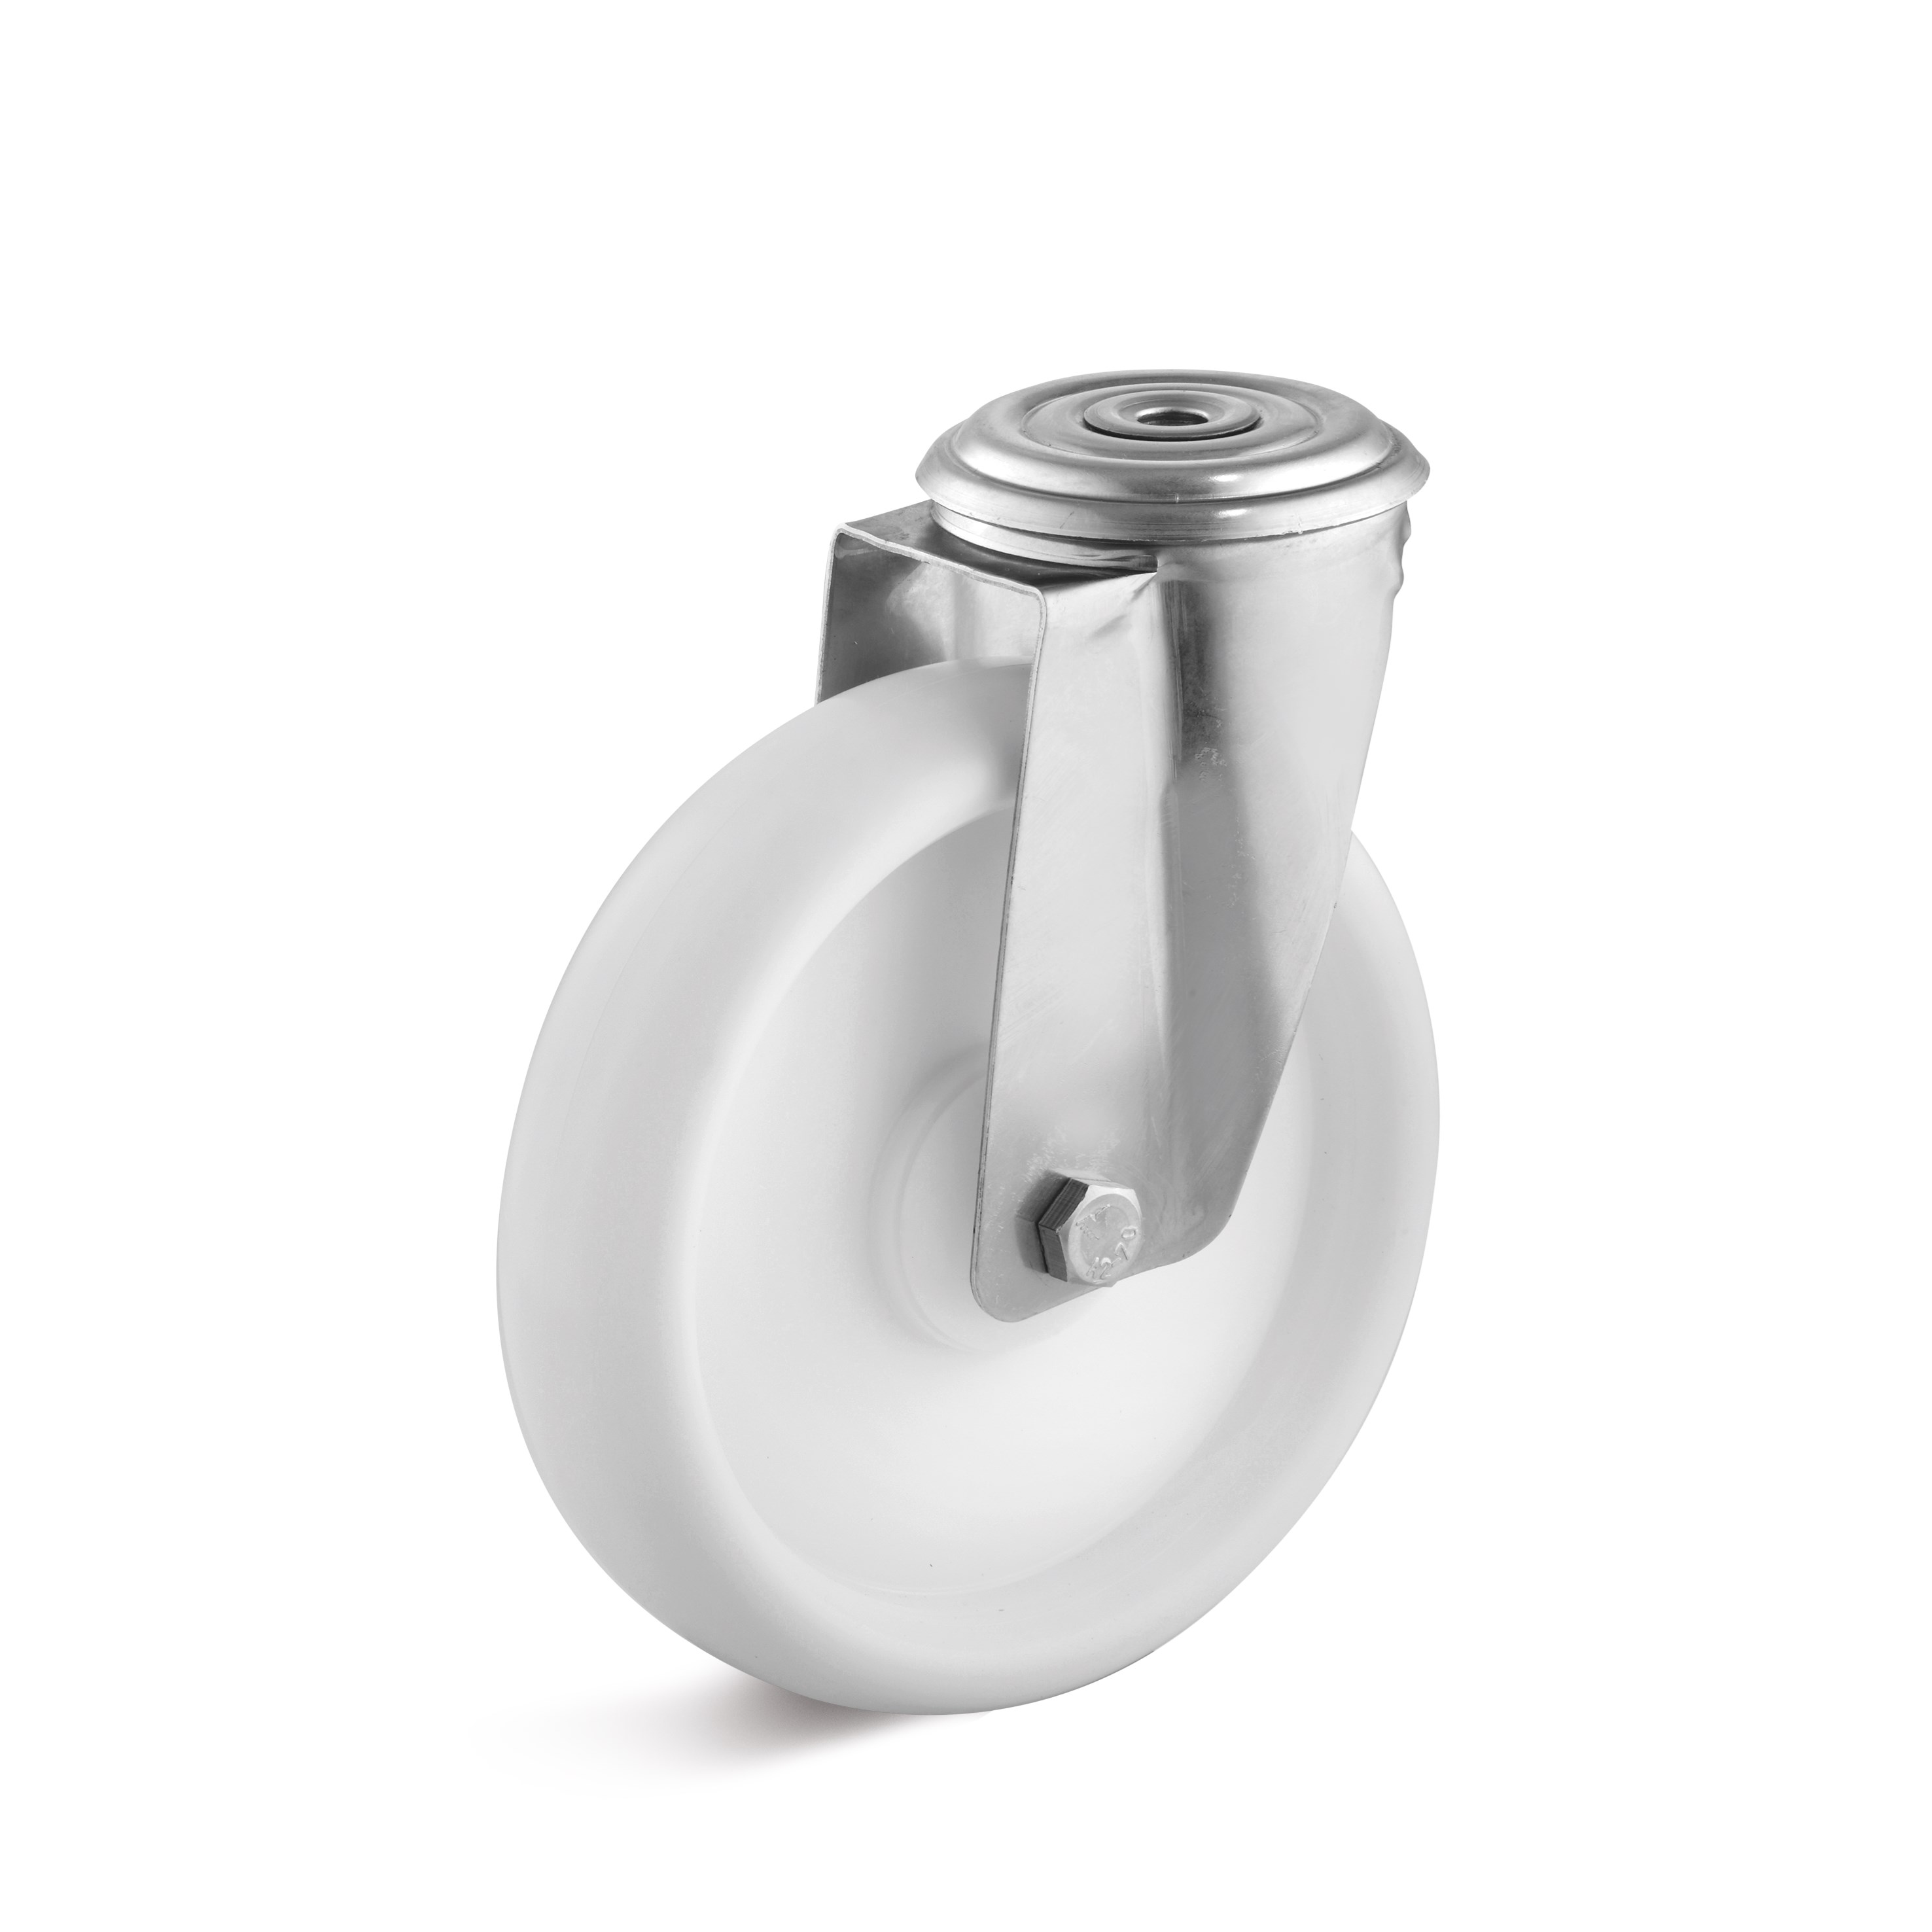 Stainless steel swivel castor with back hole and polypropylene wheel L-IV-PPBL-100-K-1